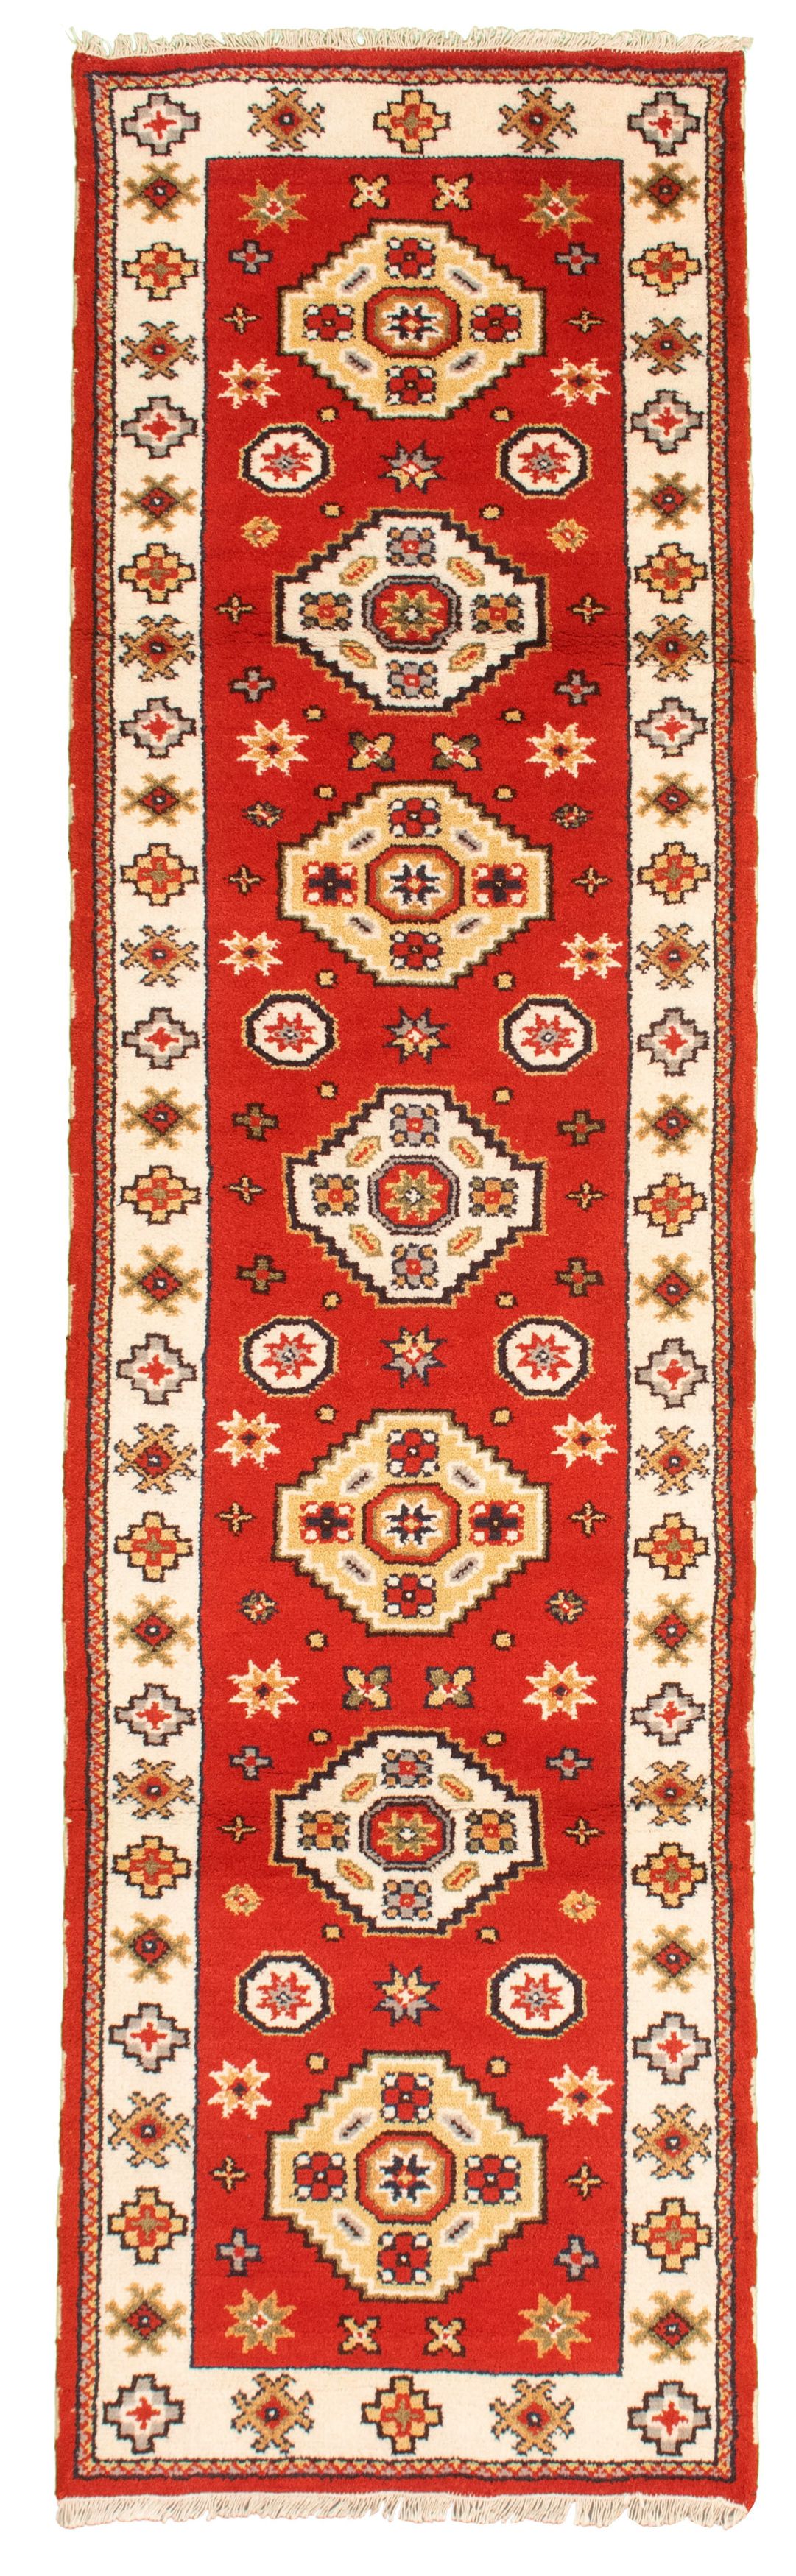 Hand-knotted Royal Kazak Red Wool Rug 2'9" x 9'11"  Size: 2'9" x 9'11"  